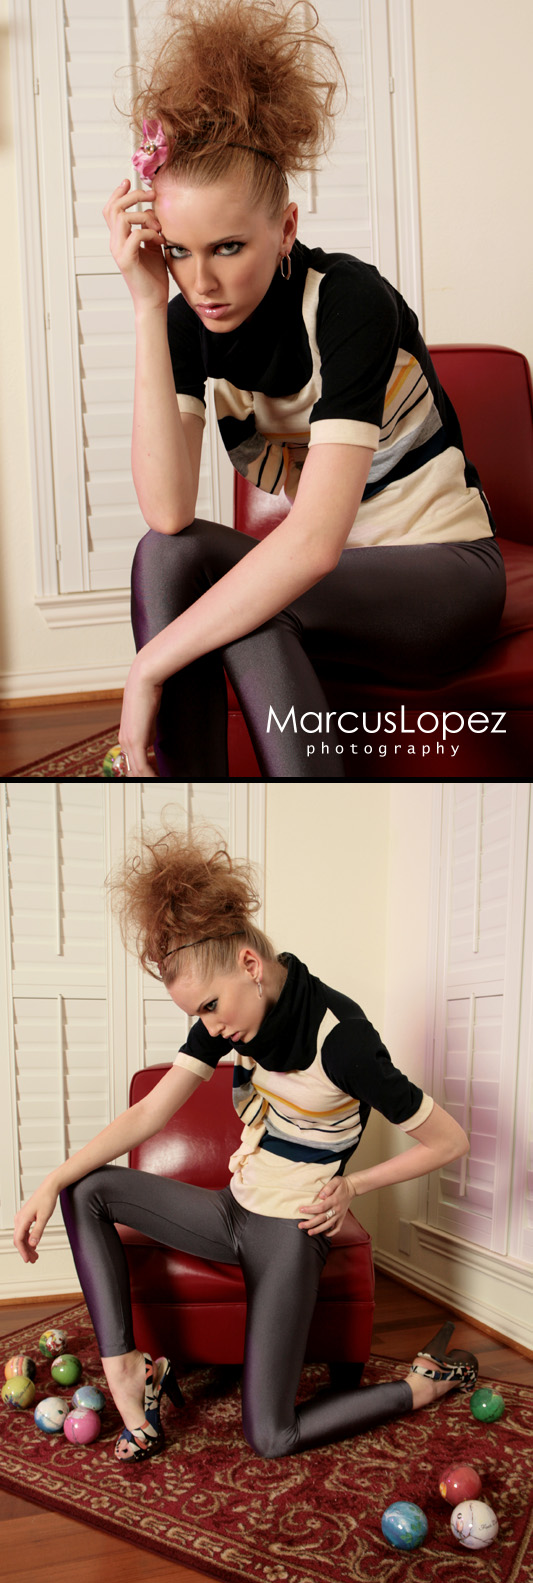 Male and Female model photo shoot of MarcusLopez photography and Z A N  Z A N  in Dallas, hair styled by Hair Design by Tai, makeup by Brad Overcash